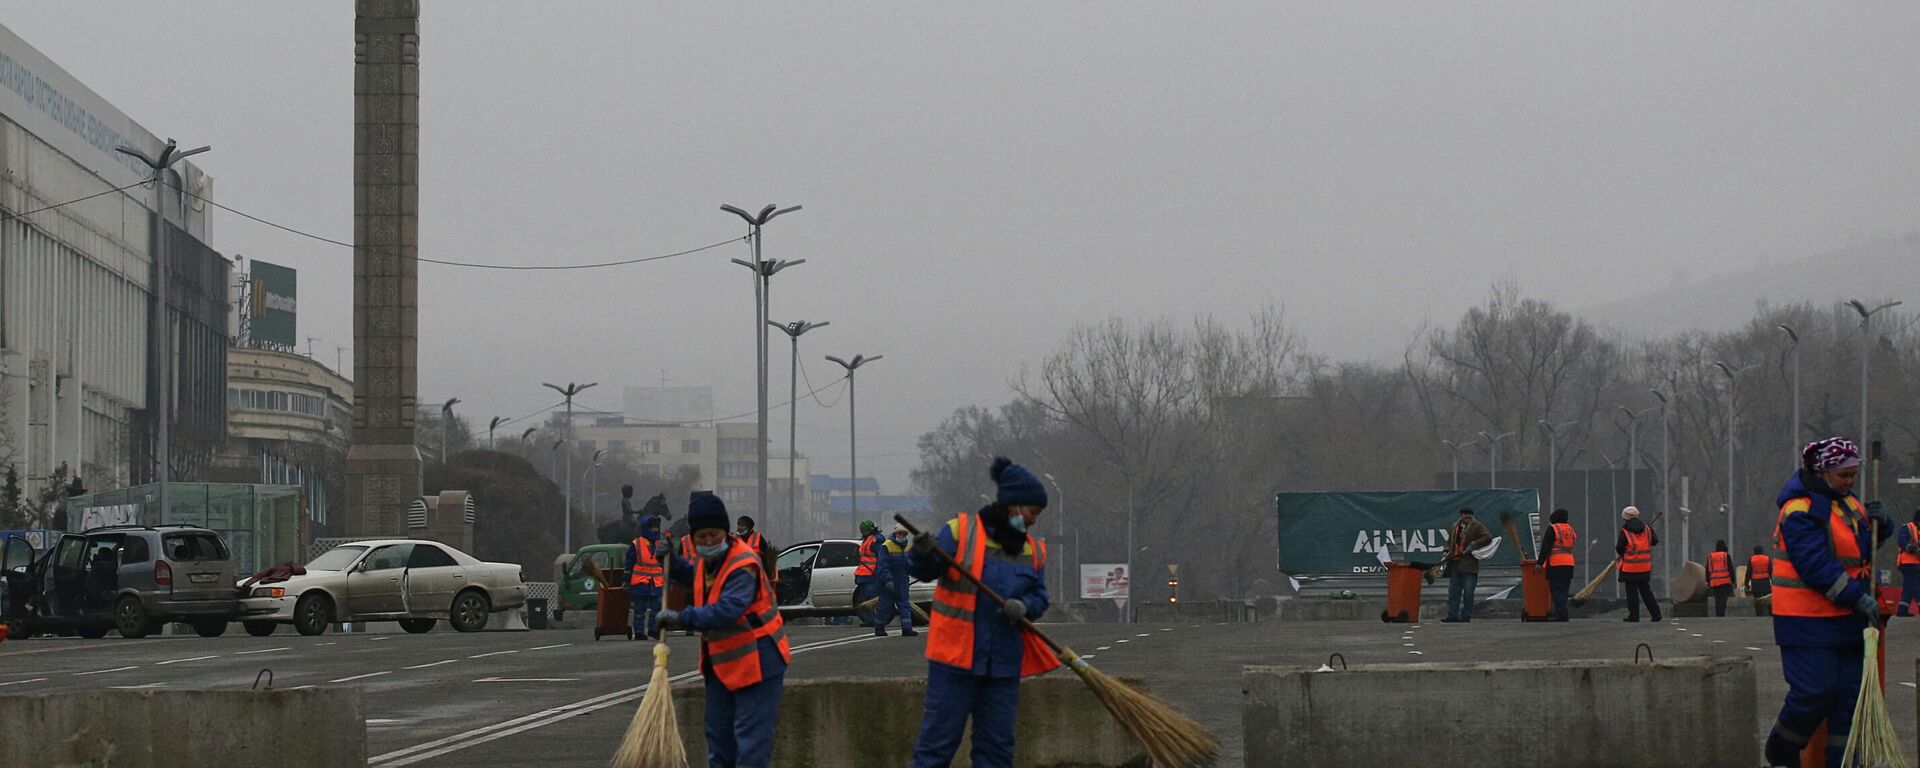 Municipal workers clean the streets near the main square after the mass protests triggered by fuel price increase, in Almaty, Kazakhstan January 10, 2022 - Sputnik International, 1920, 10.01.2022